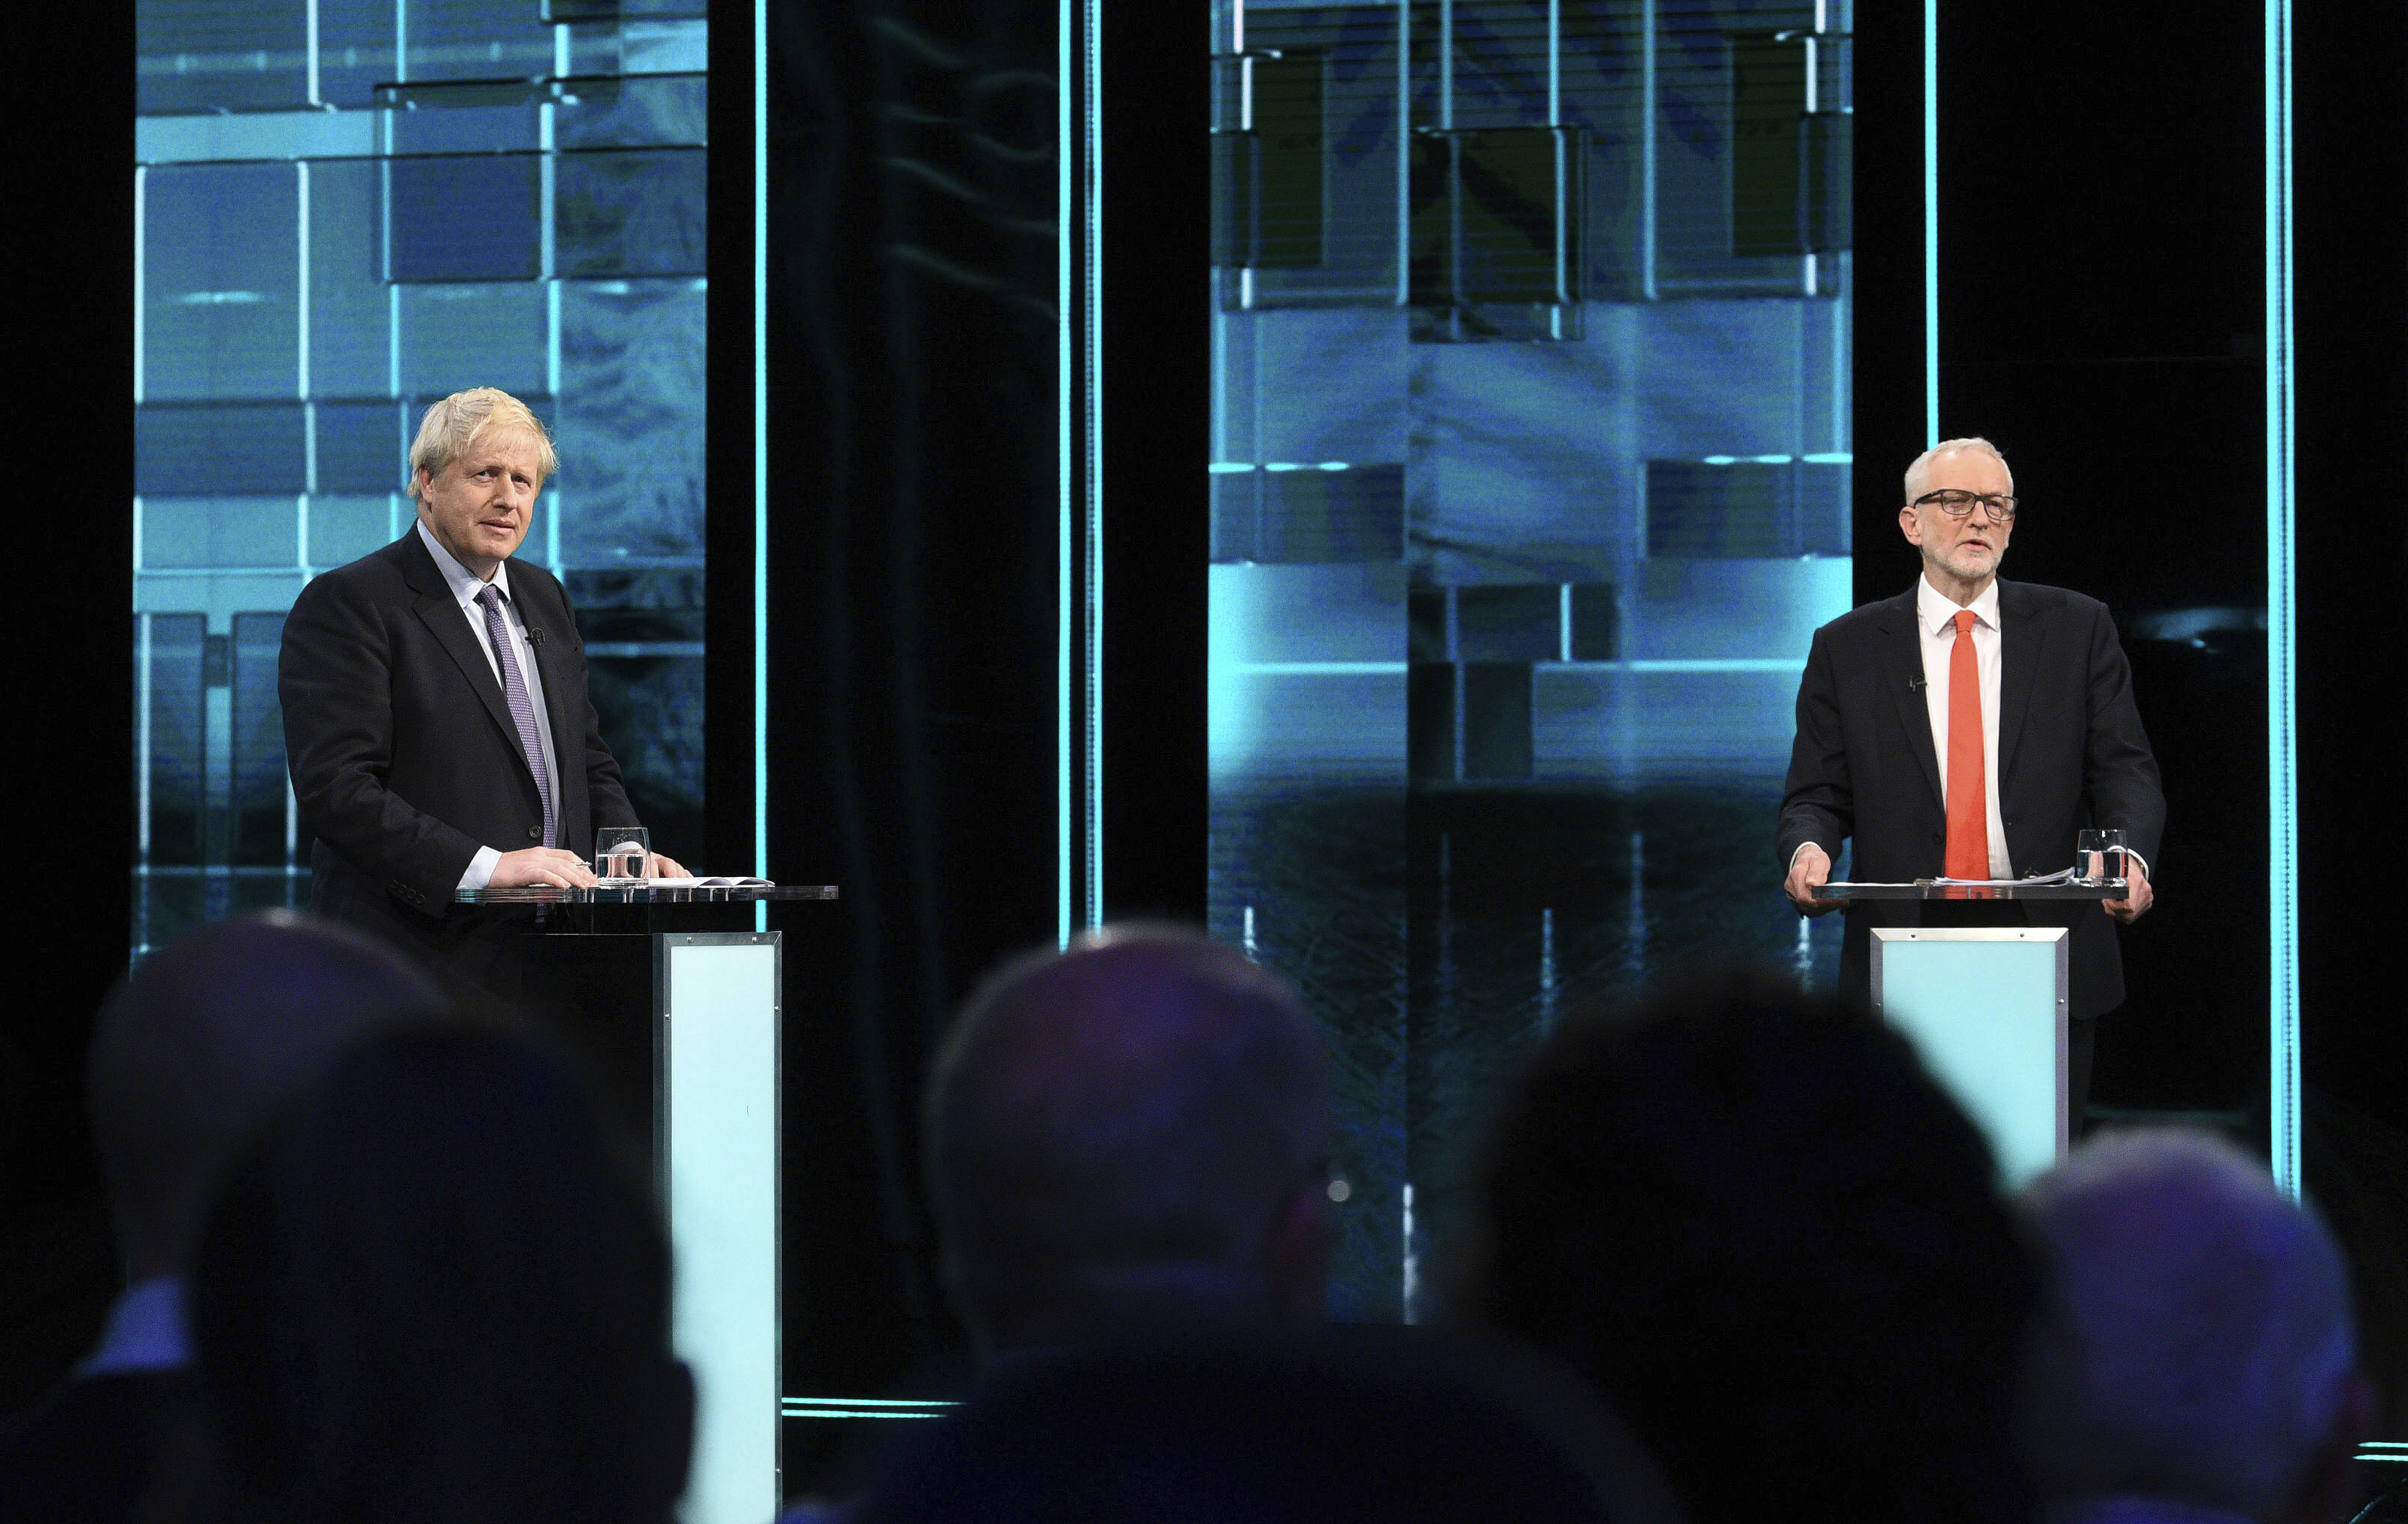 Boris Johnson and Jeremy Corbyn during their election head-to-head debate live on TV in Manchester on Tuesday.